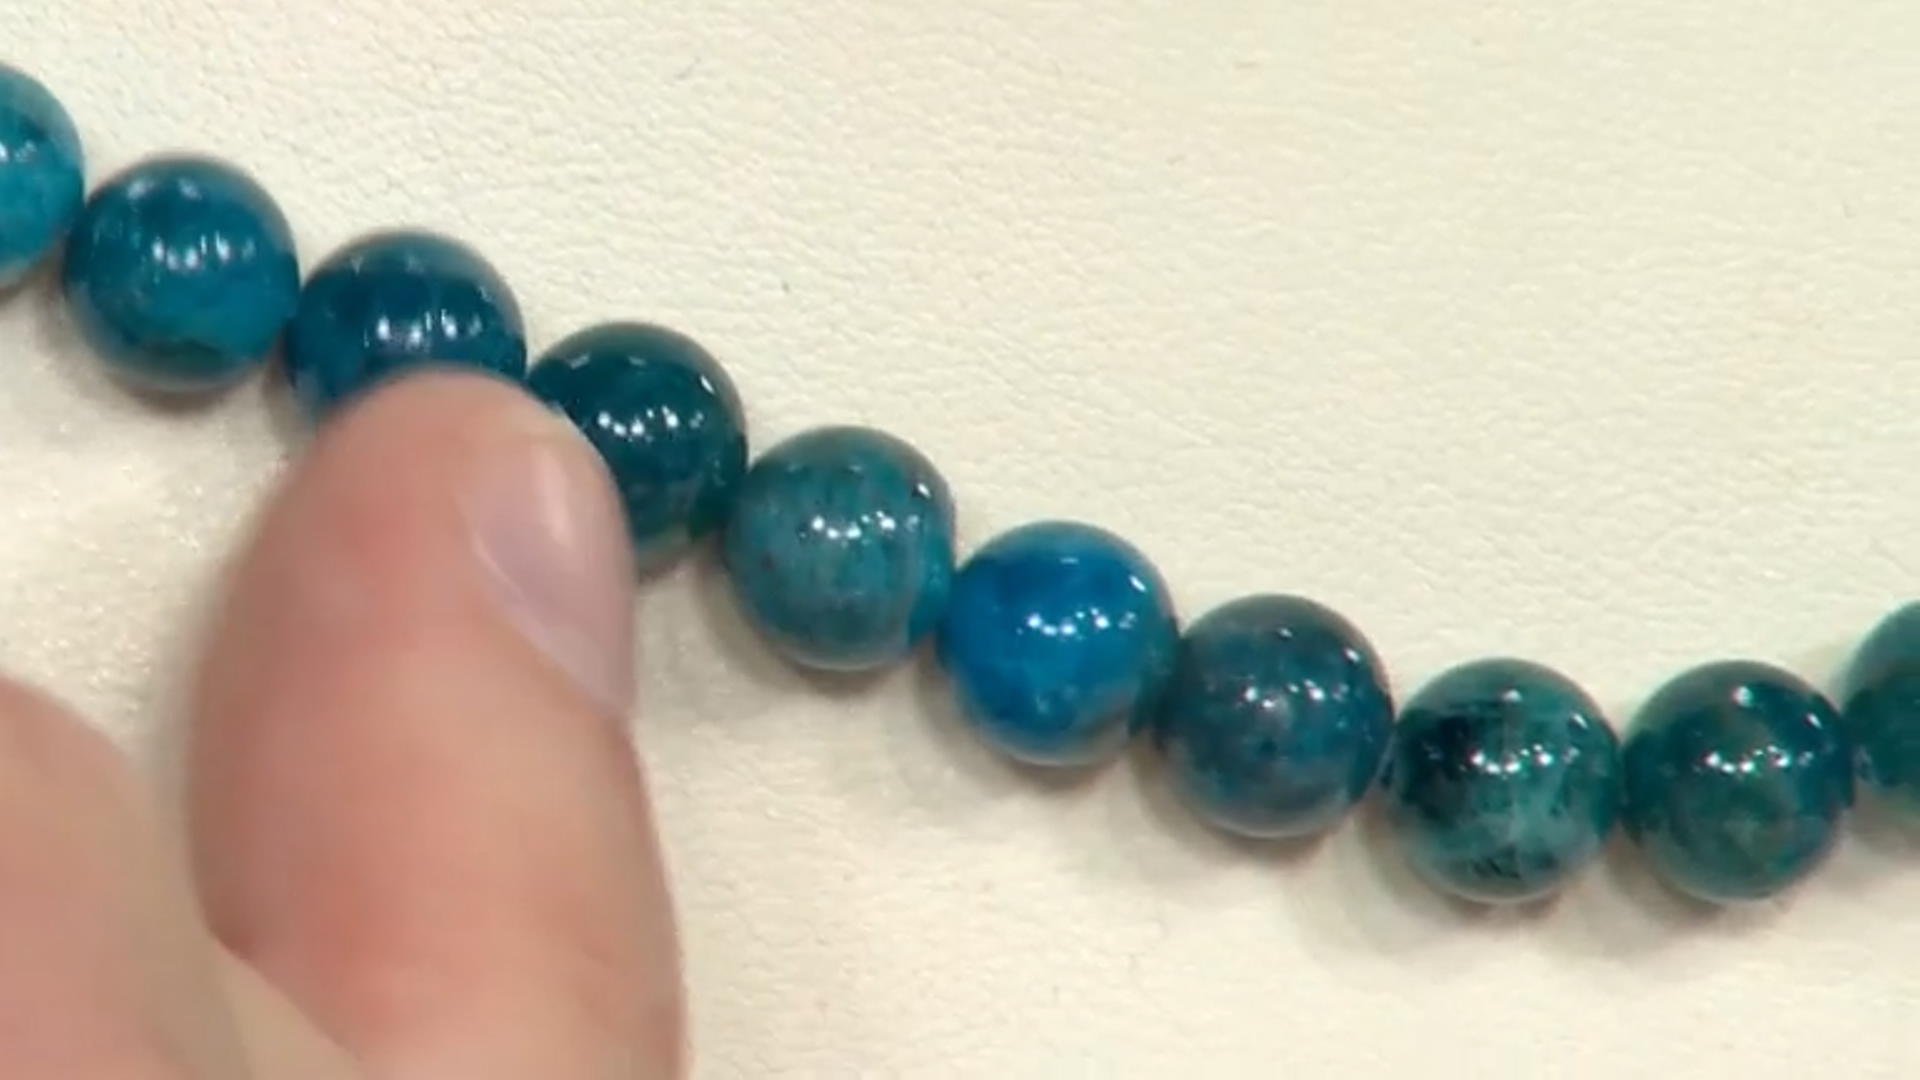 Neon Blue Apatite Round appx 4-8mm Bead Strand Set of 3 appx 15-16" Video Thumbnail